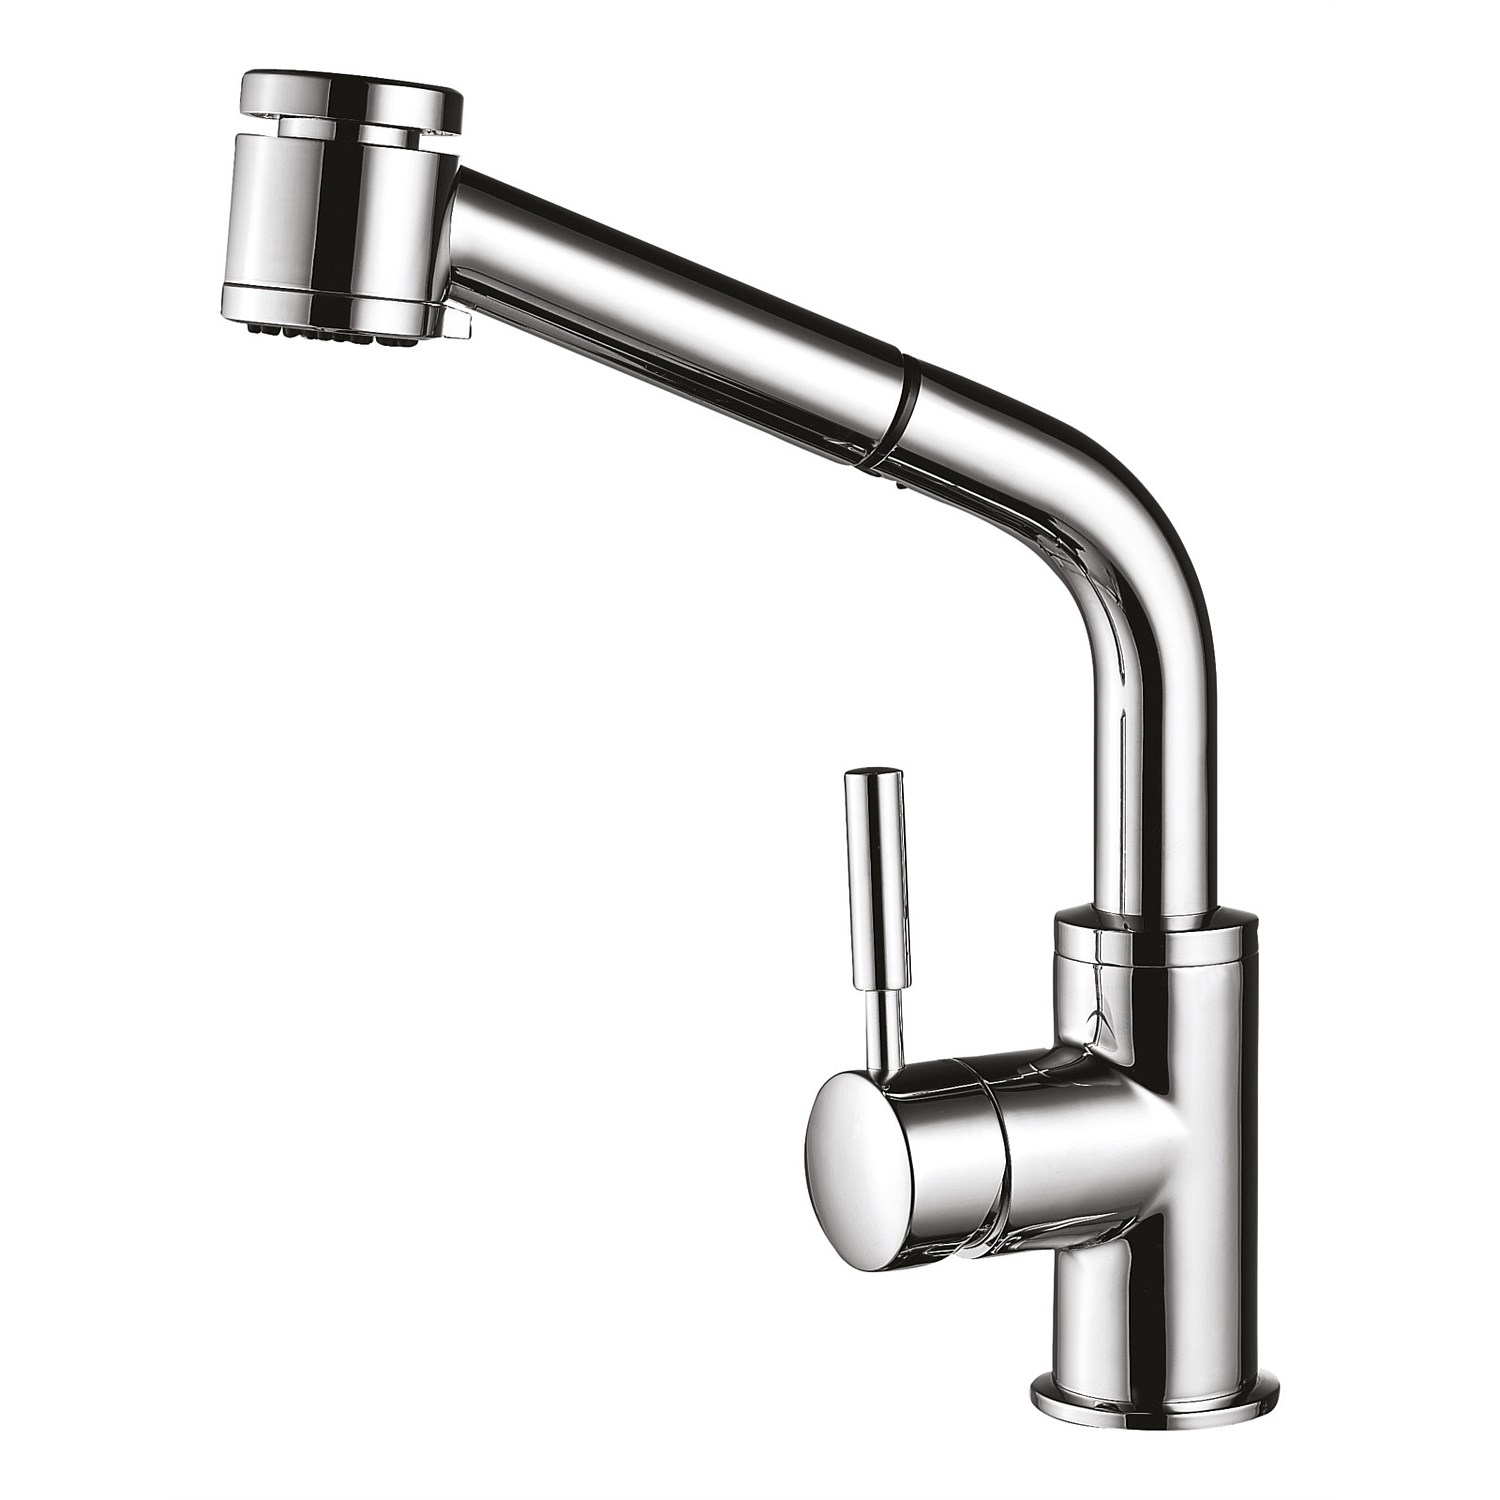 Kitchen Taps & Sink Mixers | Plumbing World - Methven Centique Single Lever  High Spout Sink Mixer With Pull-Out Spray Head